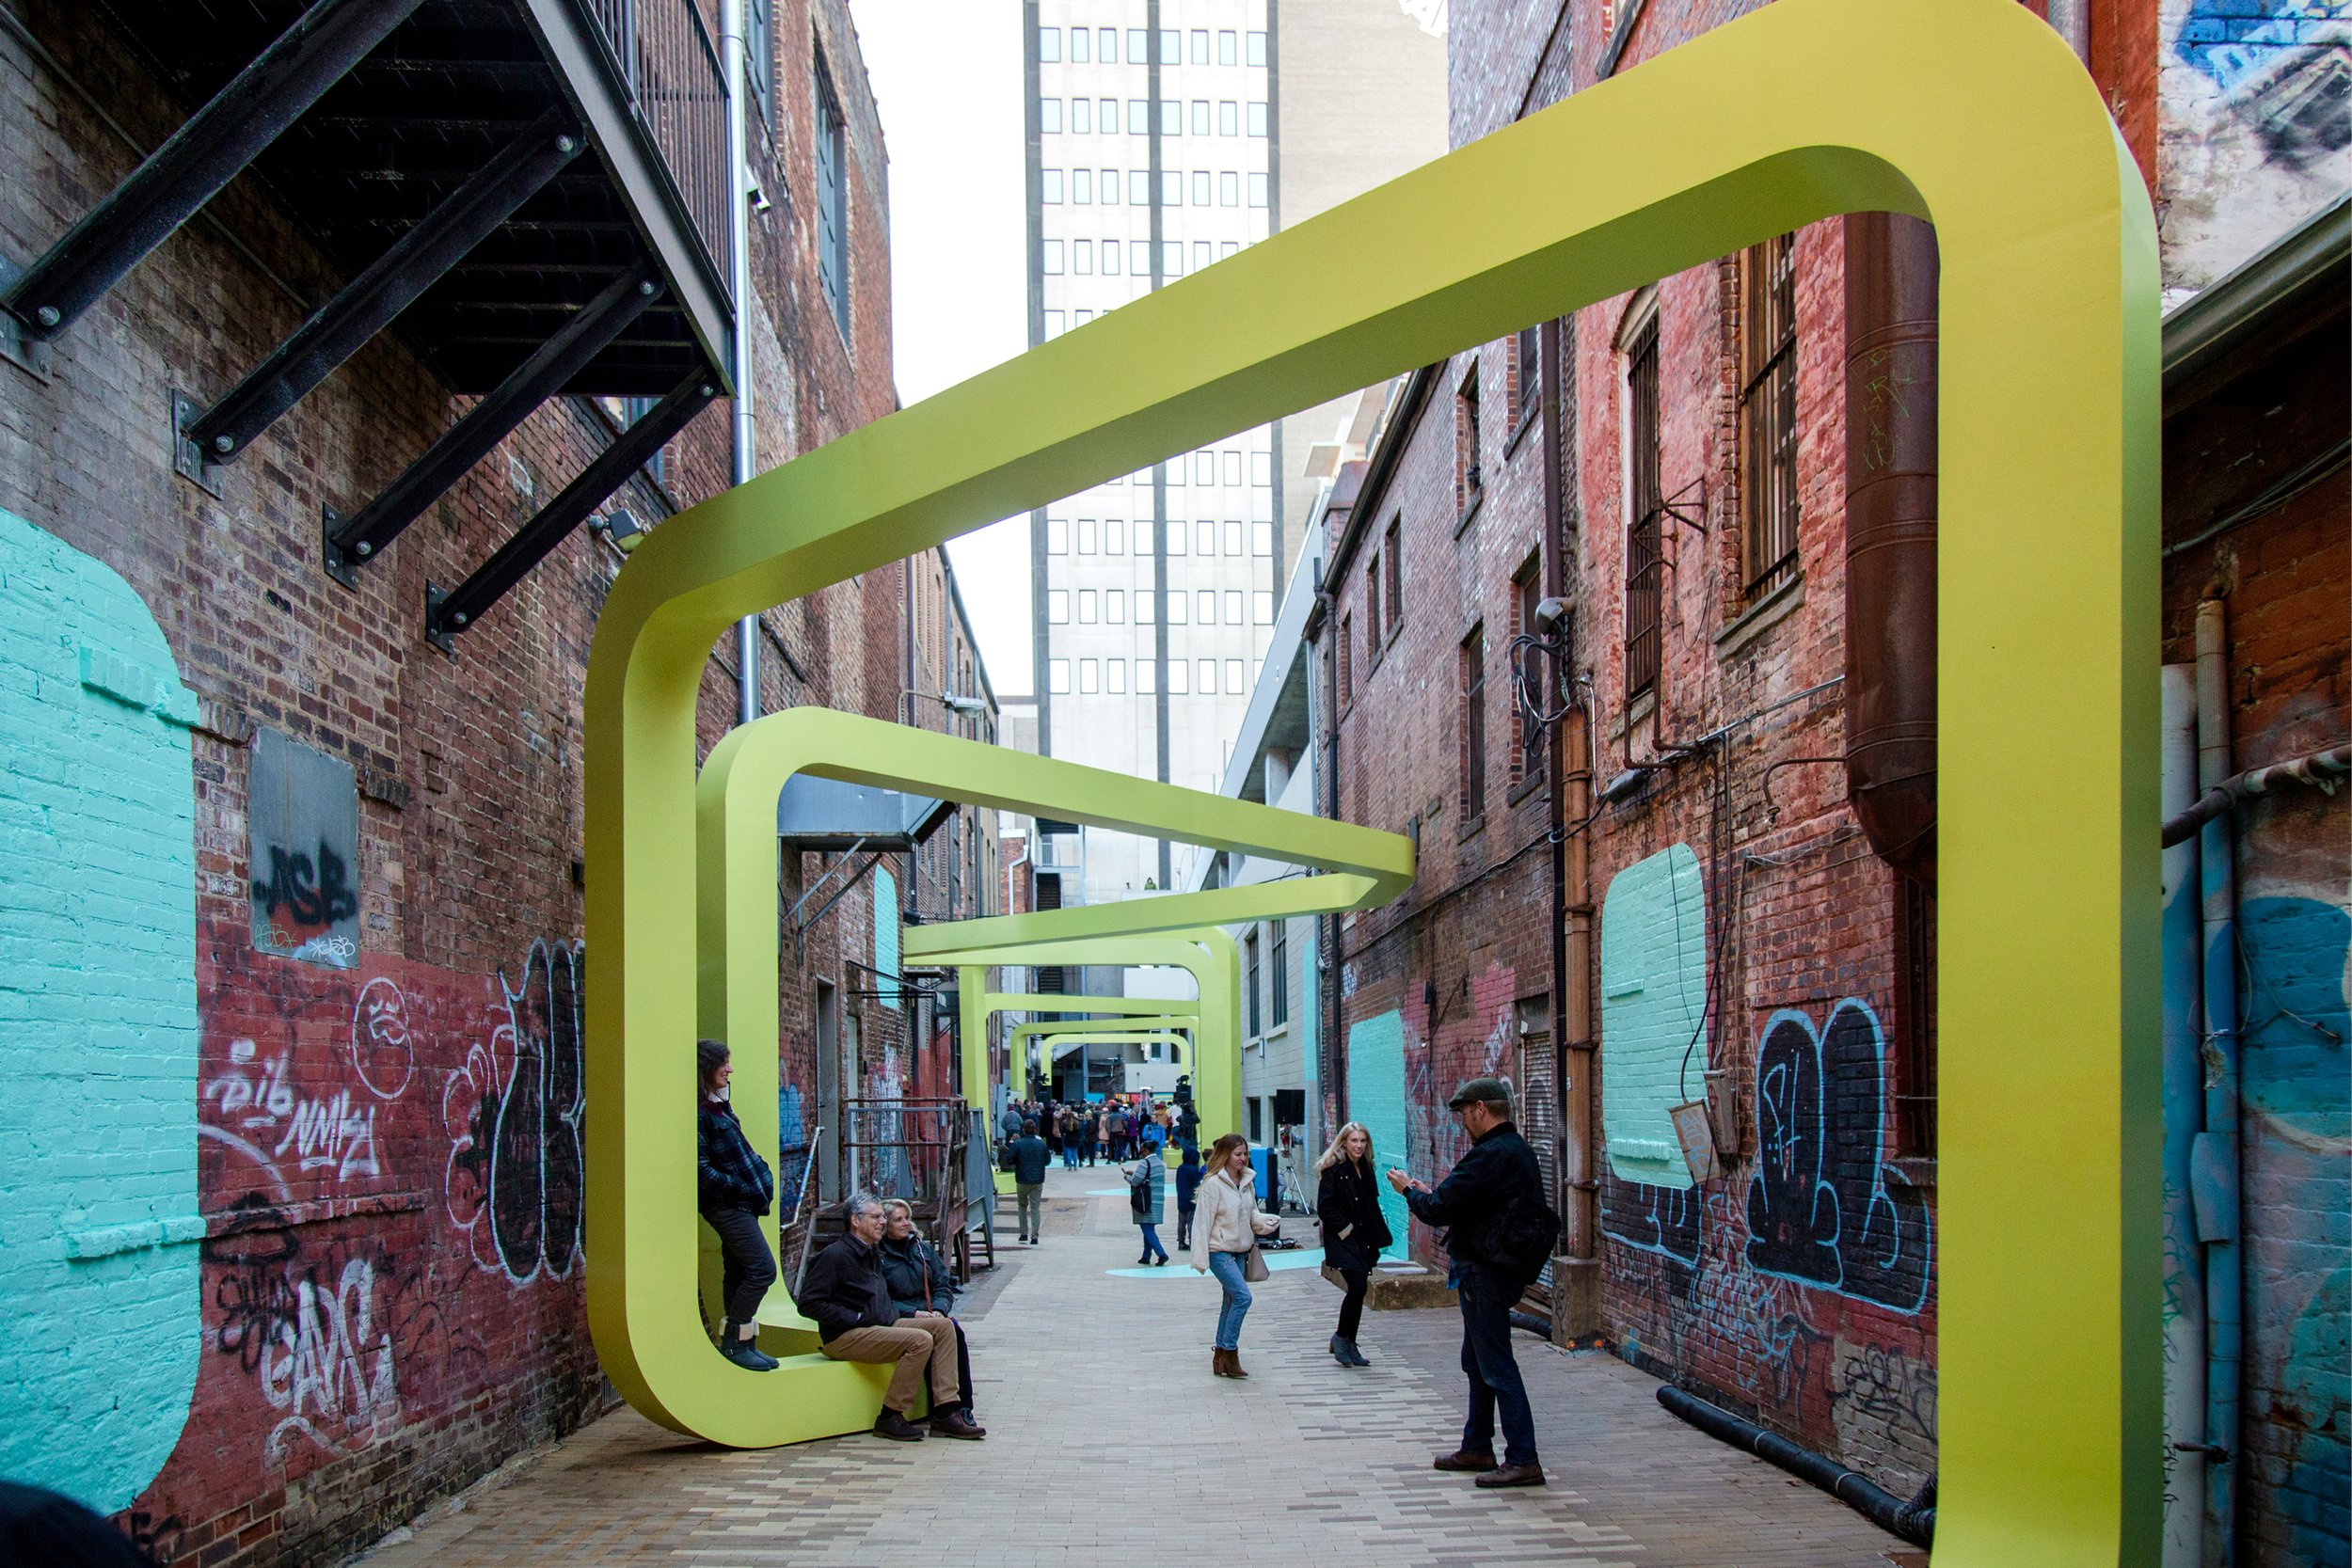 SPORTS activates an alley in downtown Chattanooga, Tennessee